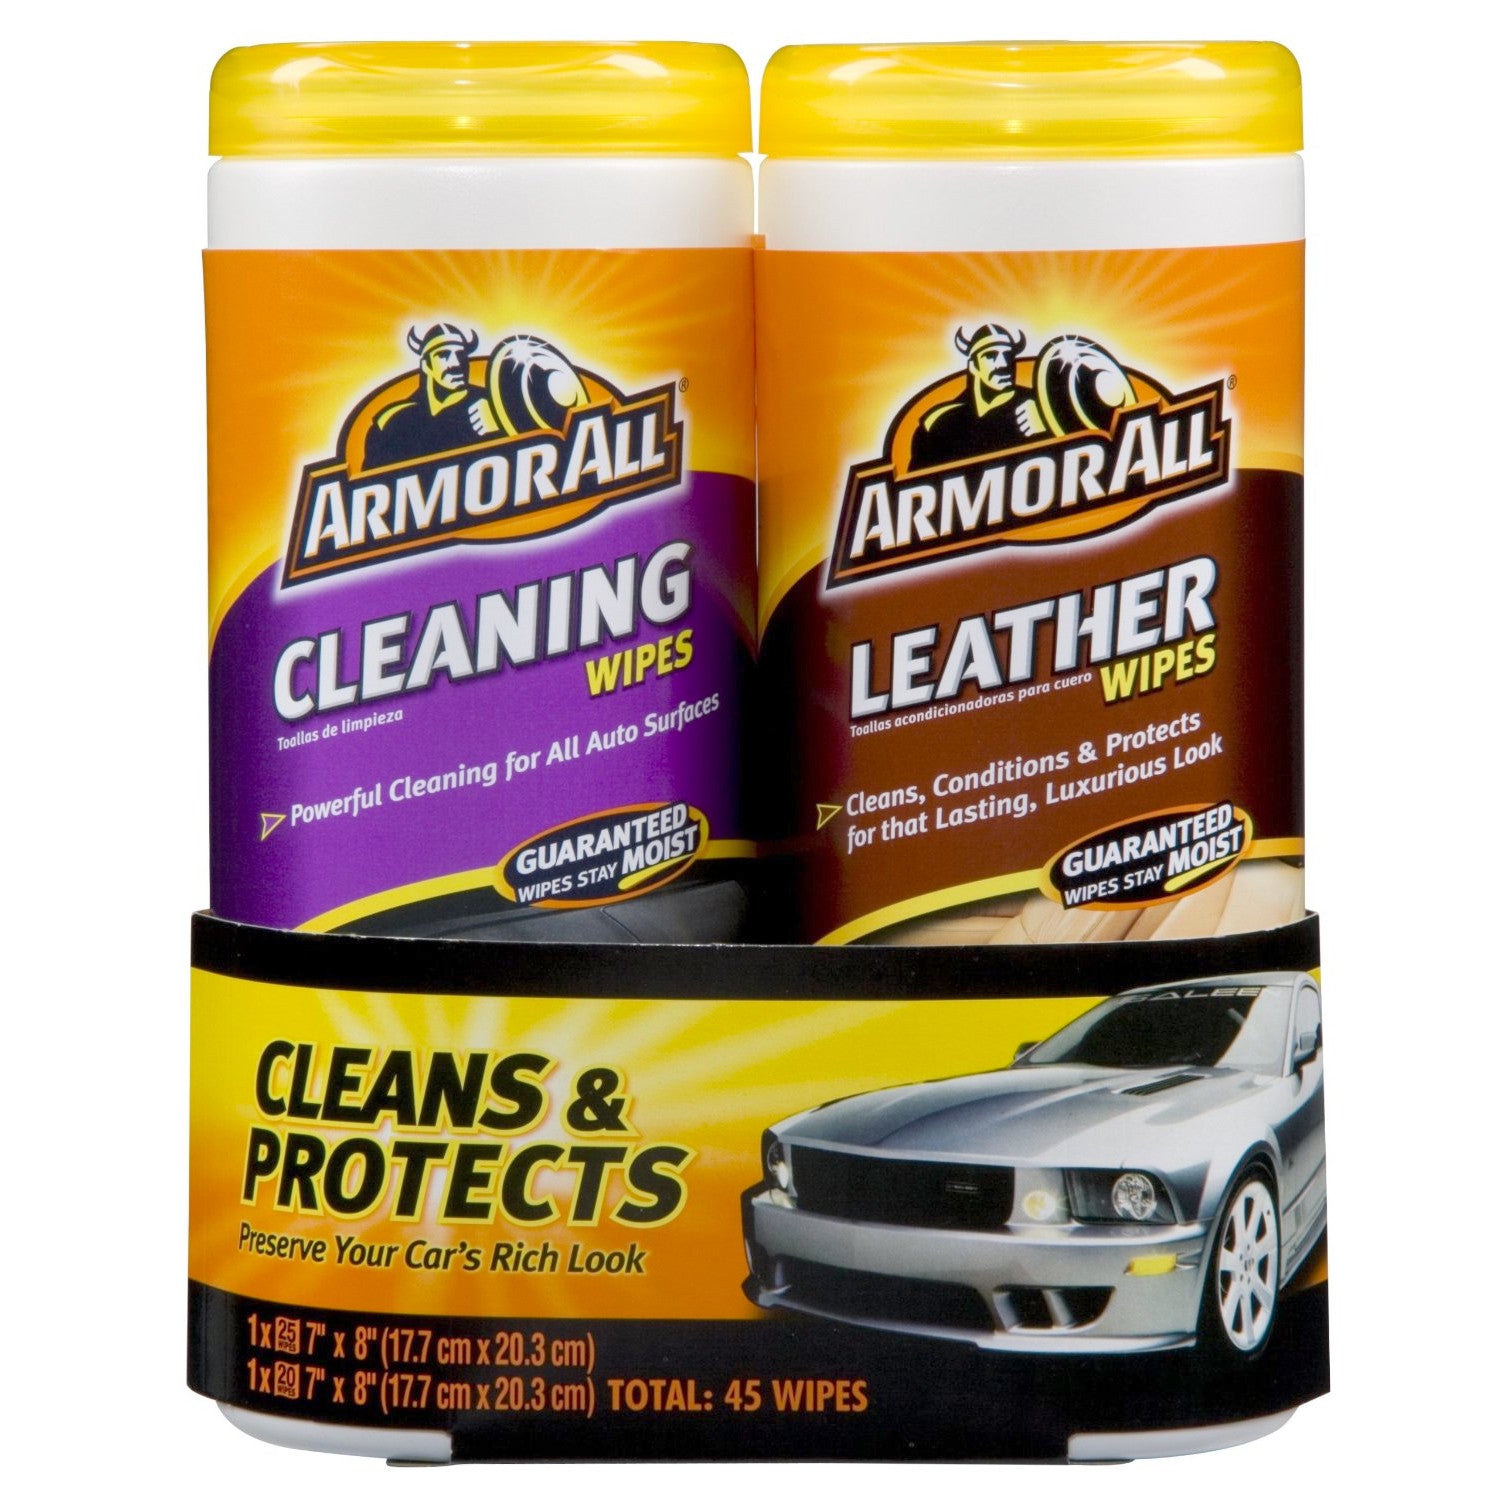 Shop Armor All Vehicle Wipes Collection at